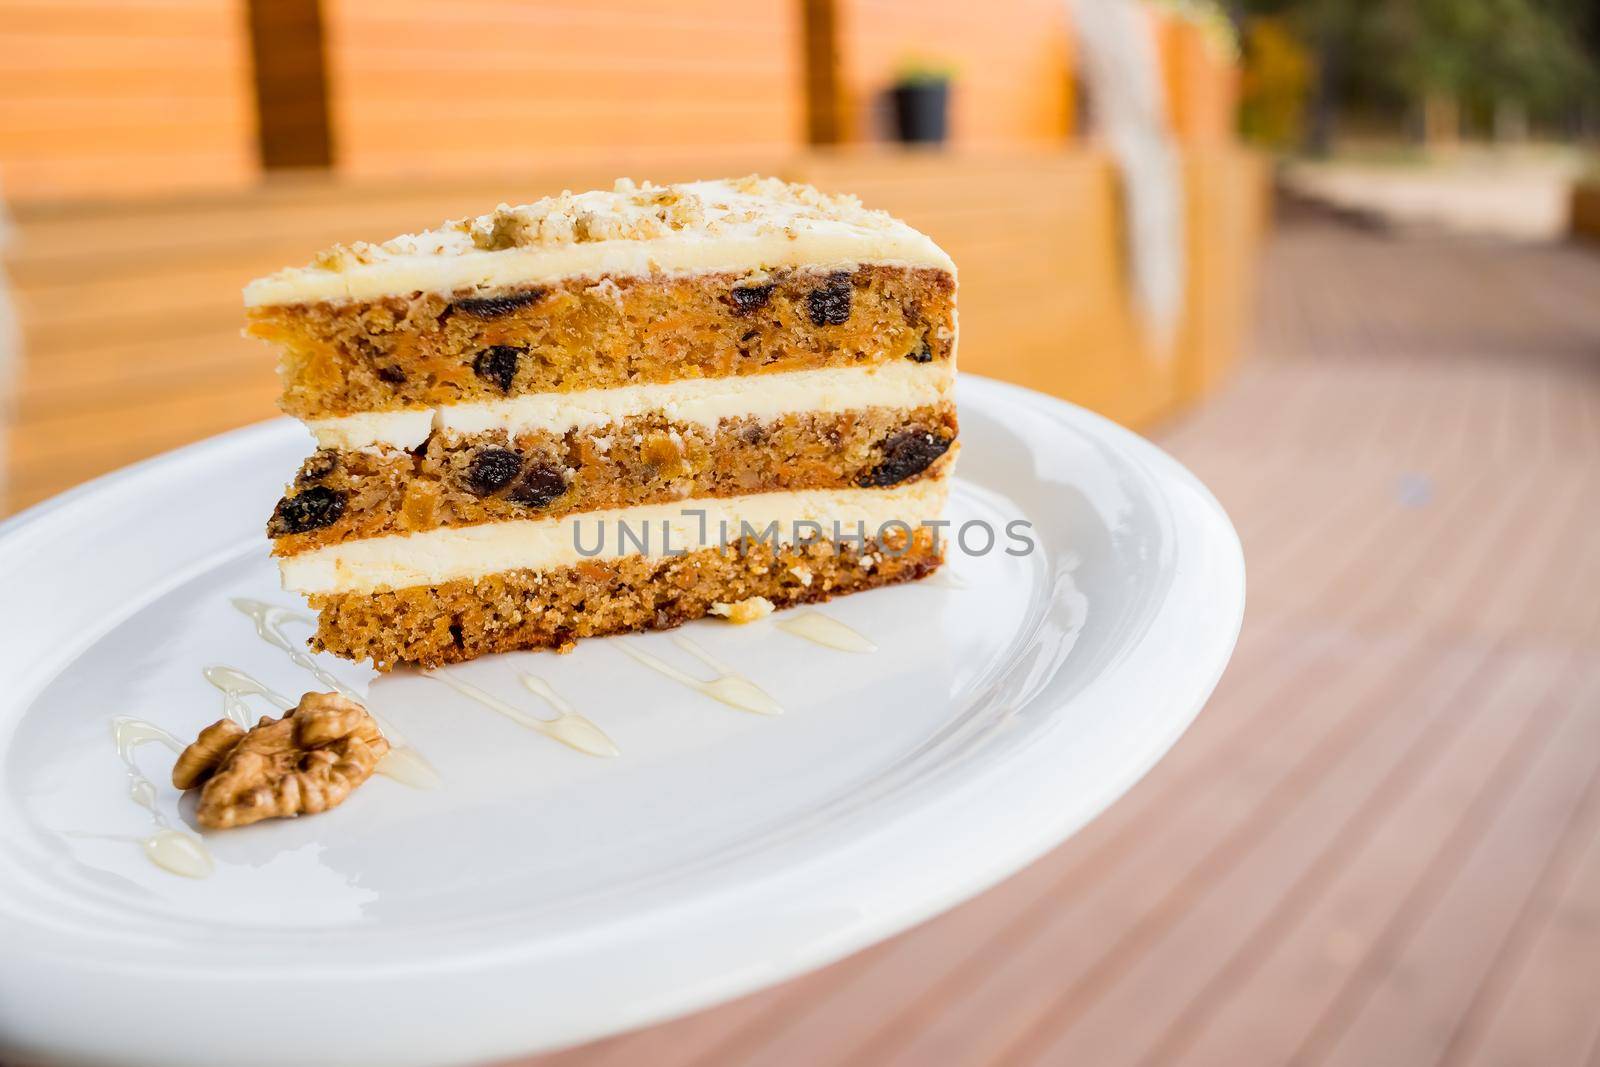 Close-up of walnut carrot cake on white plate with red background in soft focus.